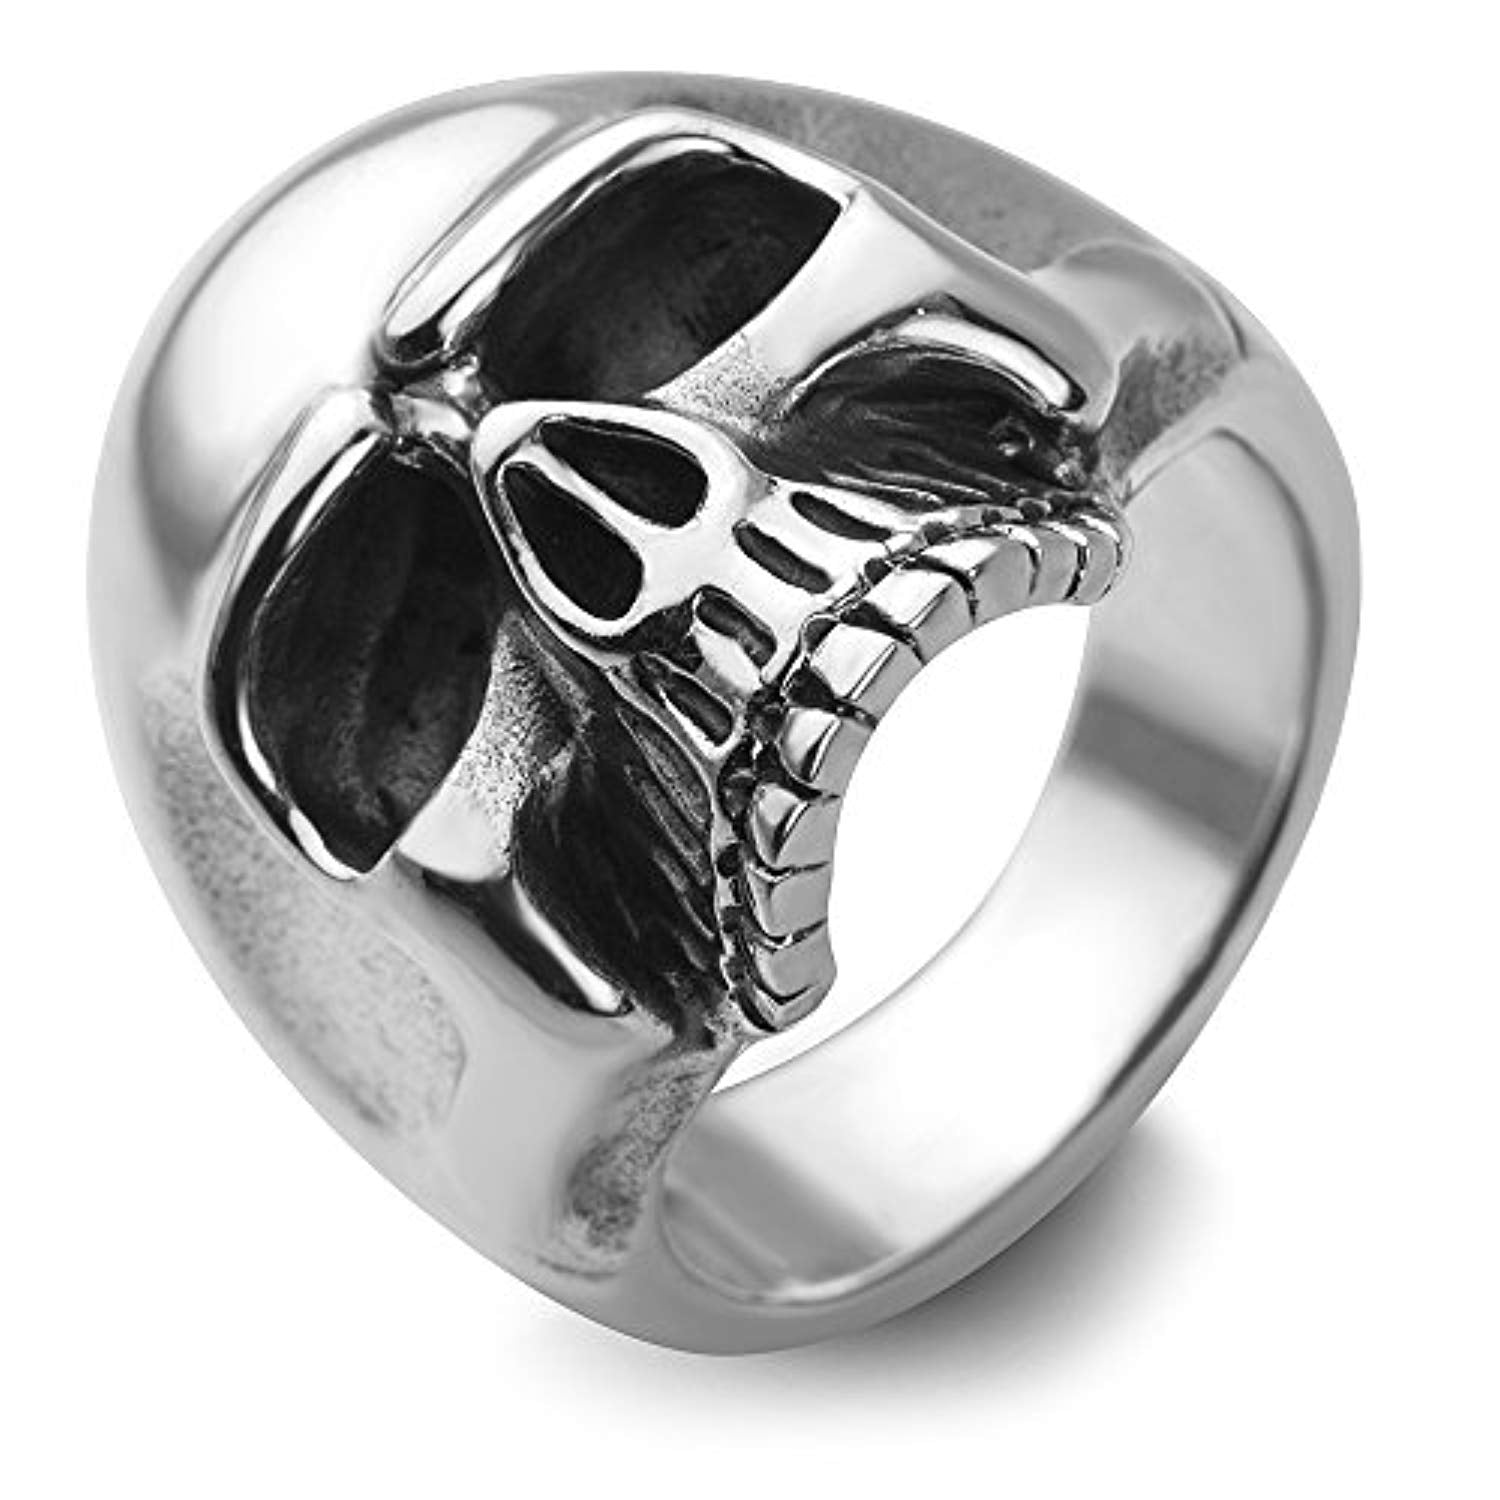 Gothic Skull Ring Collection by Iron Clan Jewelry by ironclanmetal on  DeviantArt